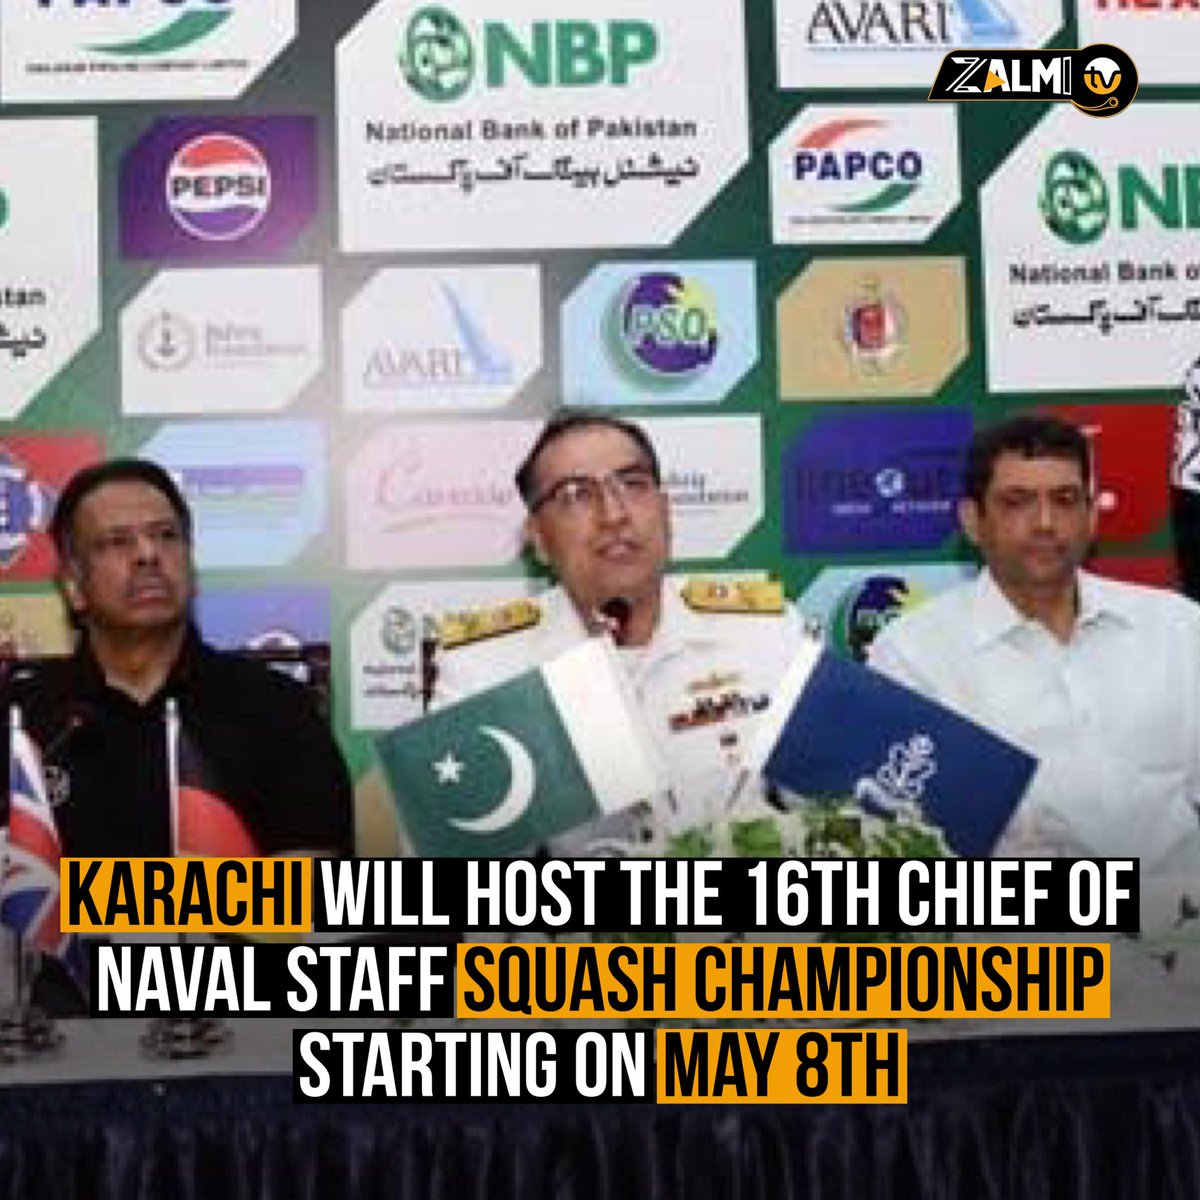 The prestigious championship will feature a total of 23 matches with a prize money of US $20,000. It has been designated as the PSA Challenger Series for Men. #SportsUpdate #PakistanSports #ZalmiTV